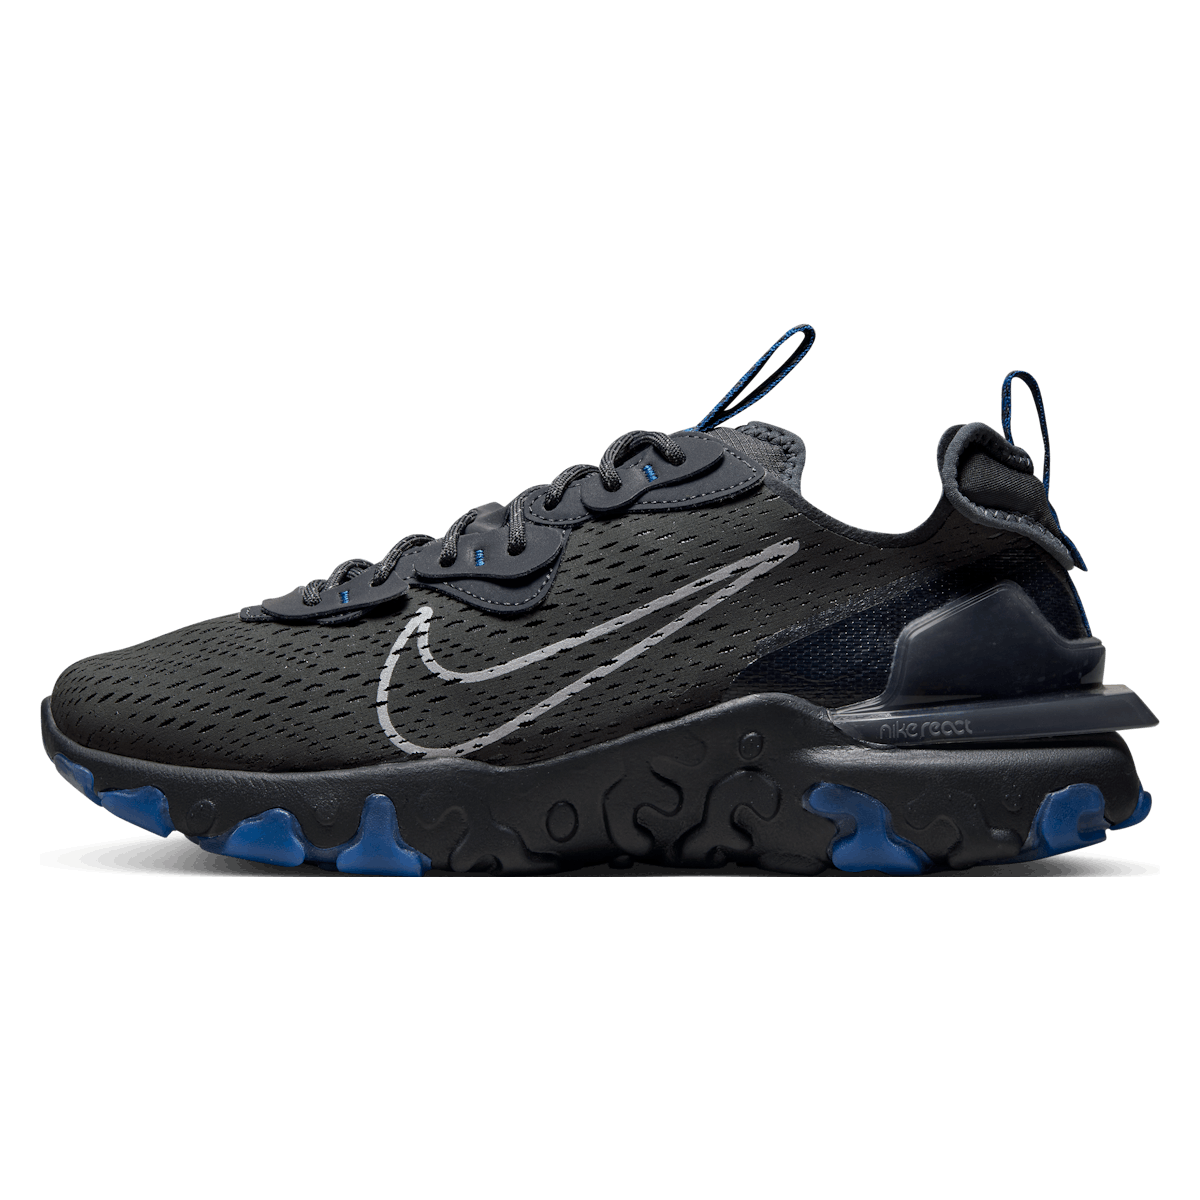 Nike React Vision "Anthracite Industrial Blue"